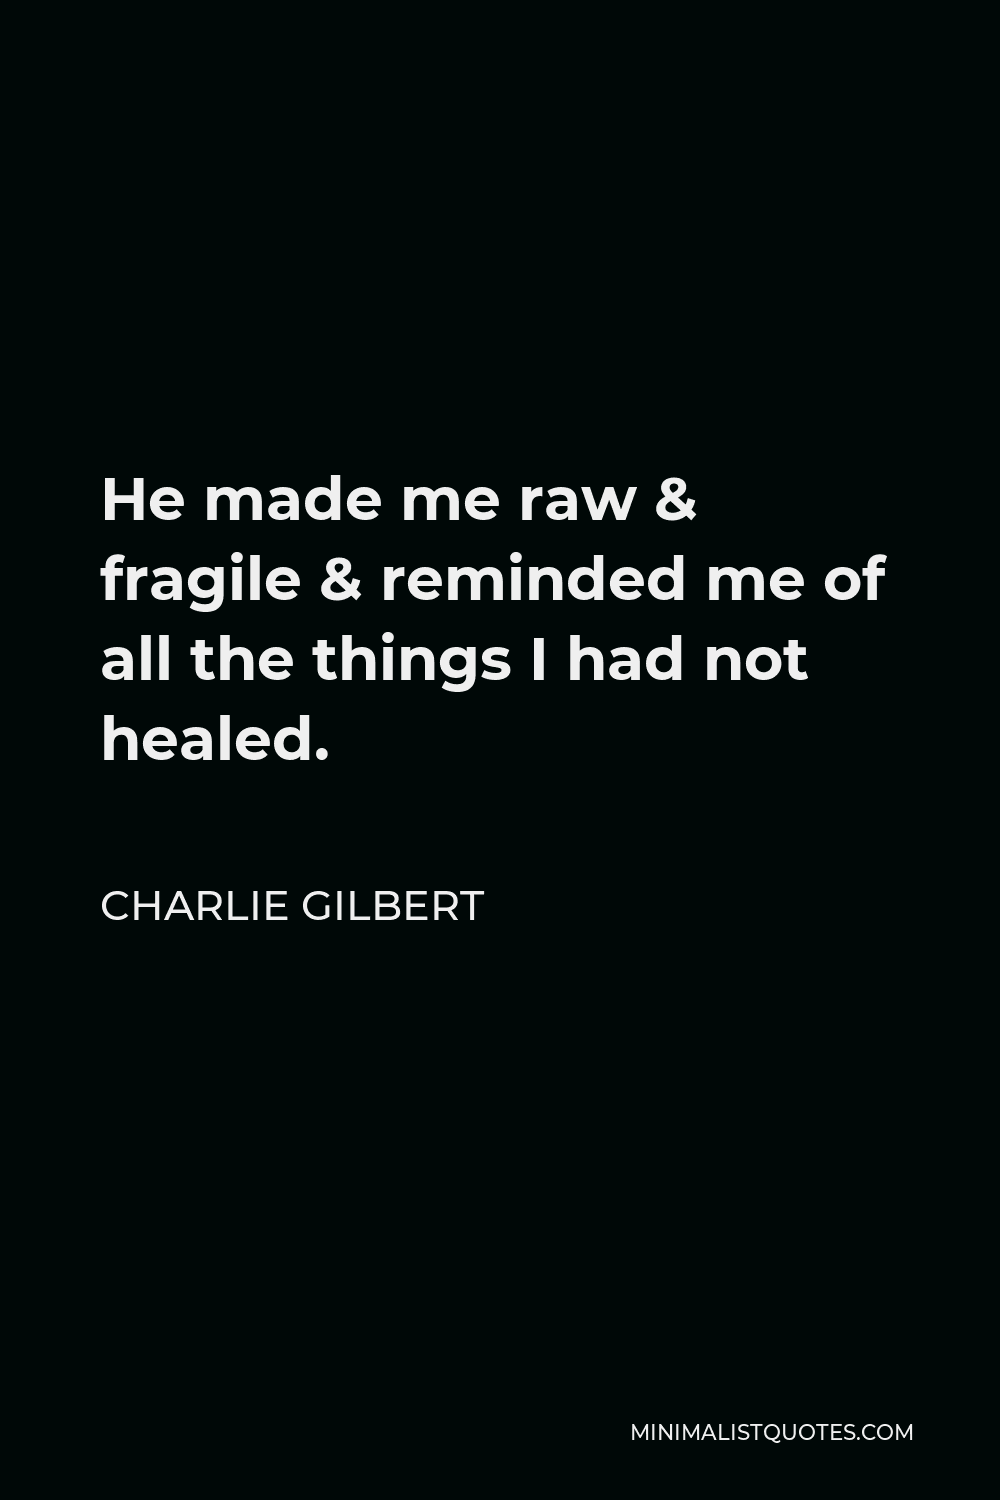 Charlie Gilbert Quote - He made me raw & fragile & reminded me of all the things I had not healed.